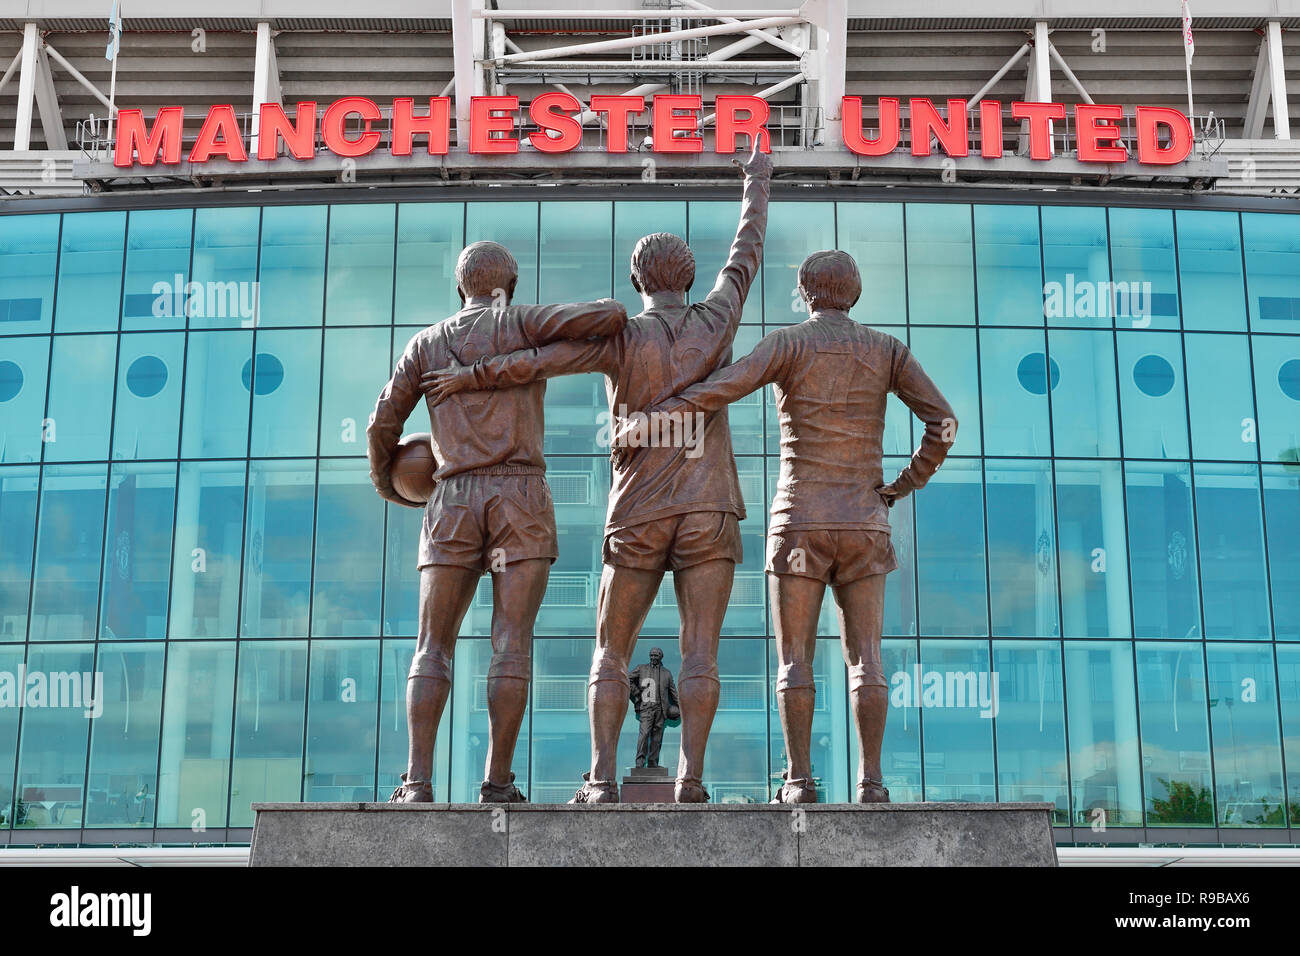 Old Trafford, stade de Manchester United Football Club, Angleterre, Royaume-Uni Banque D'Images